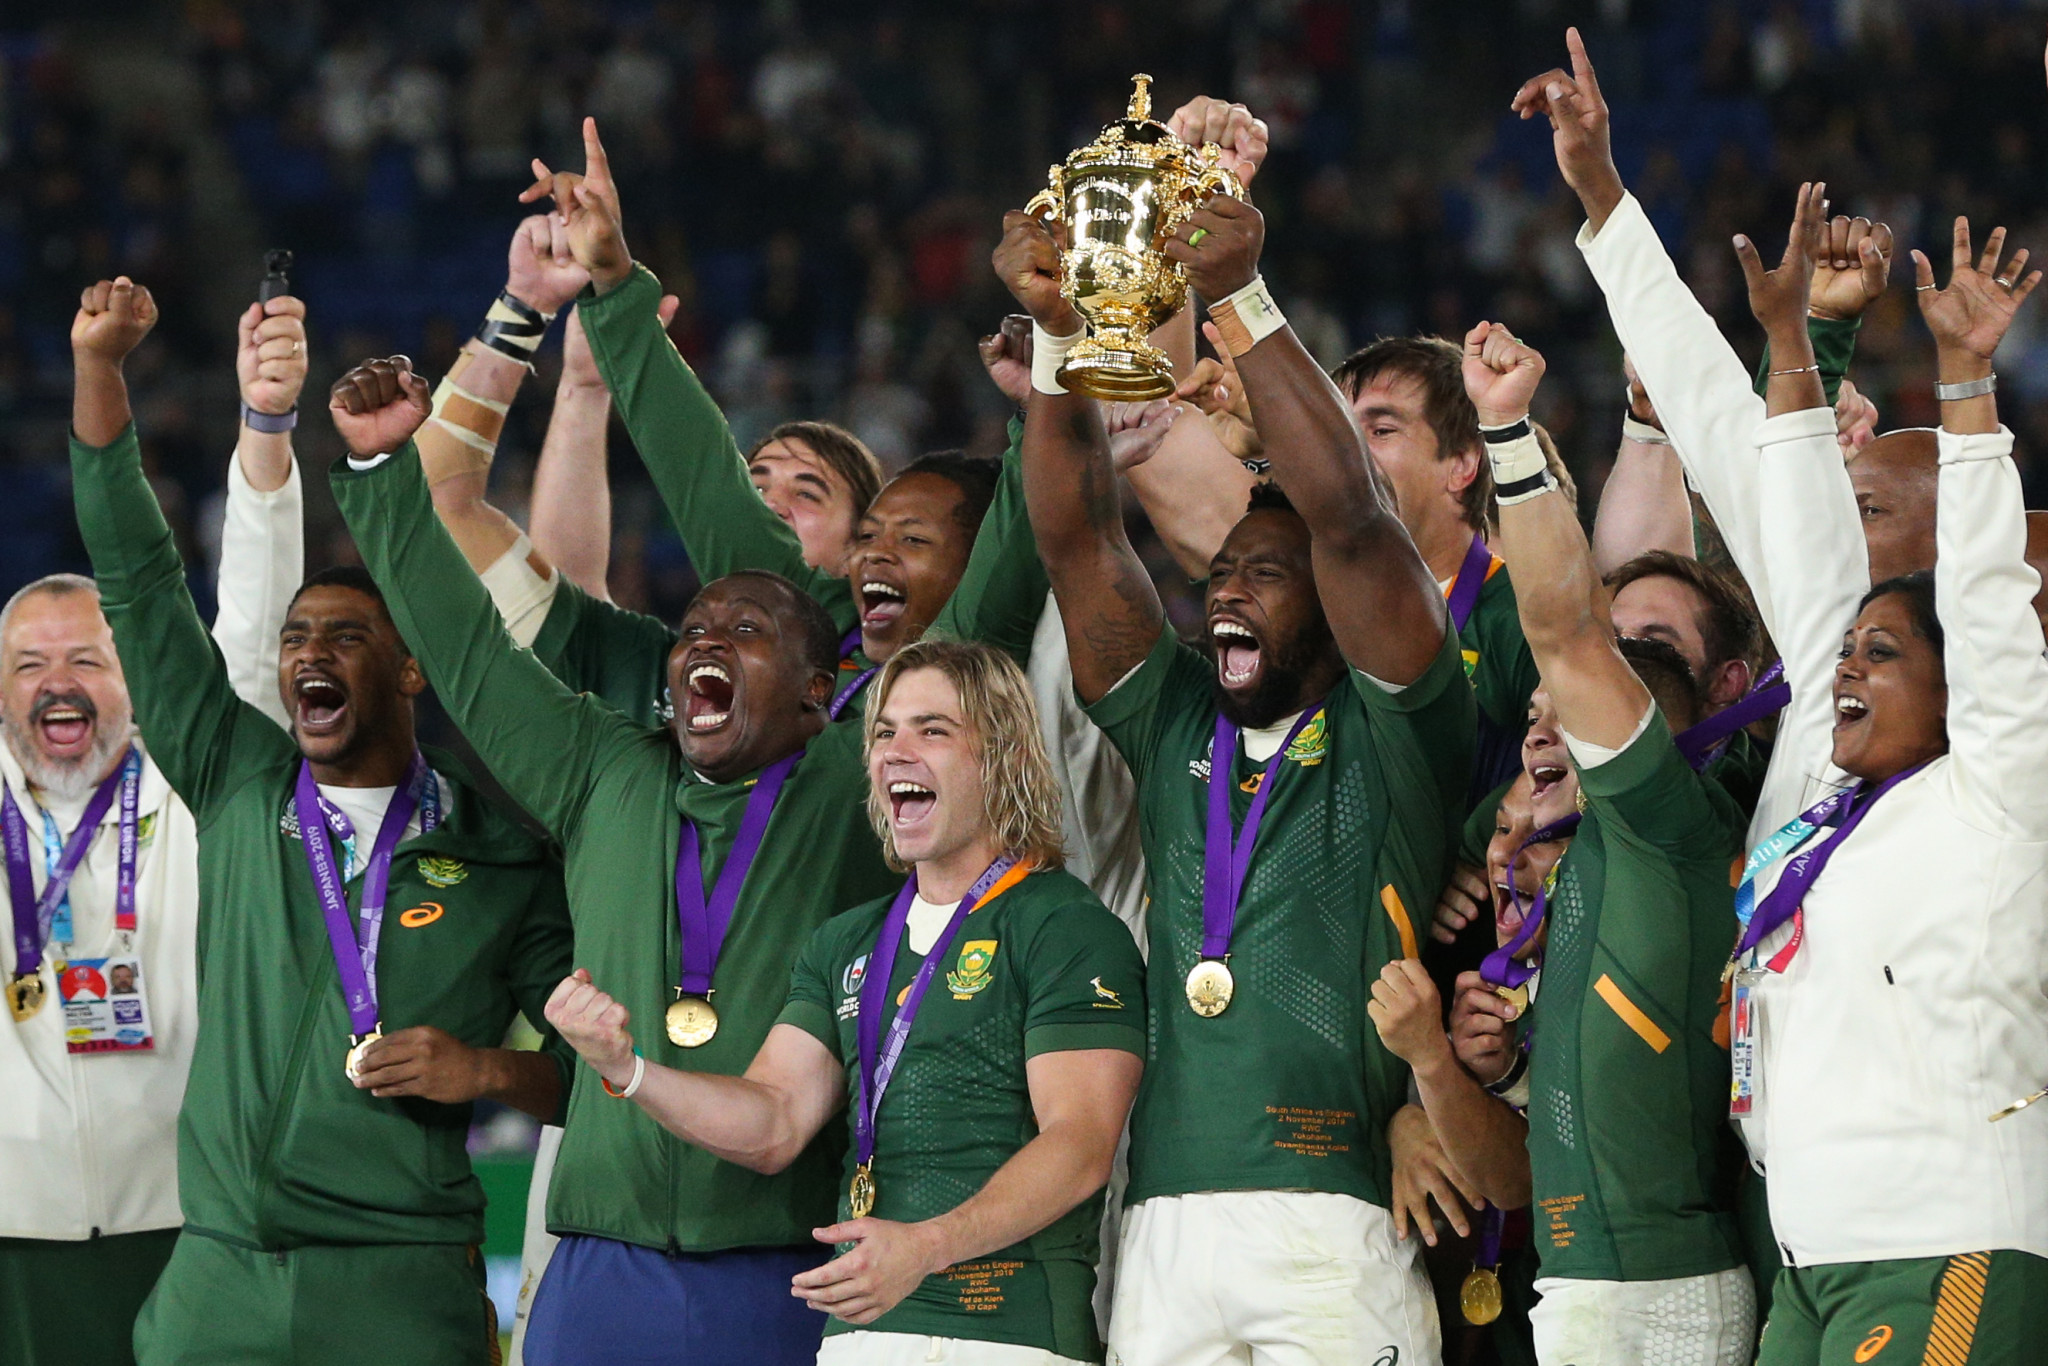 There was a time, not so long ago, that Siya Kolisi would not have been allowed to play the Springboks, let alone captain them to Rugby World Cup glory, as he did in Yokhoma last week ©Getty Images